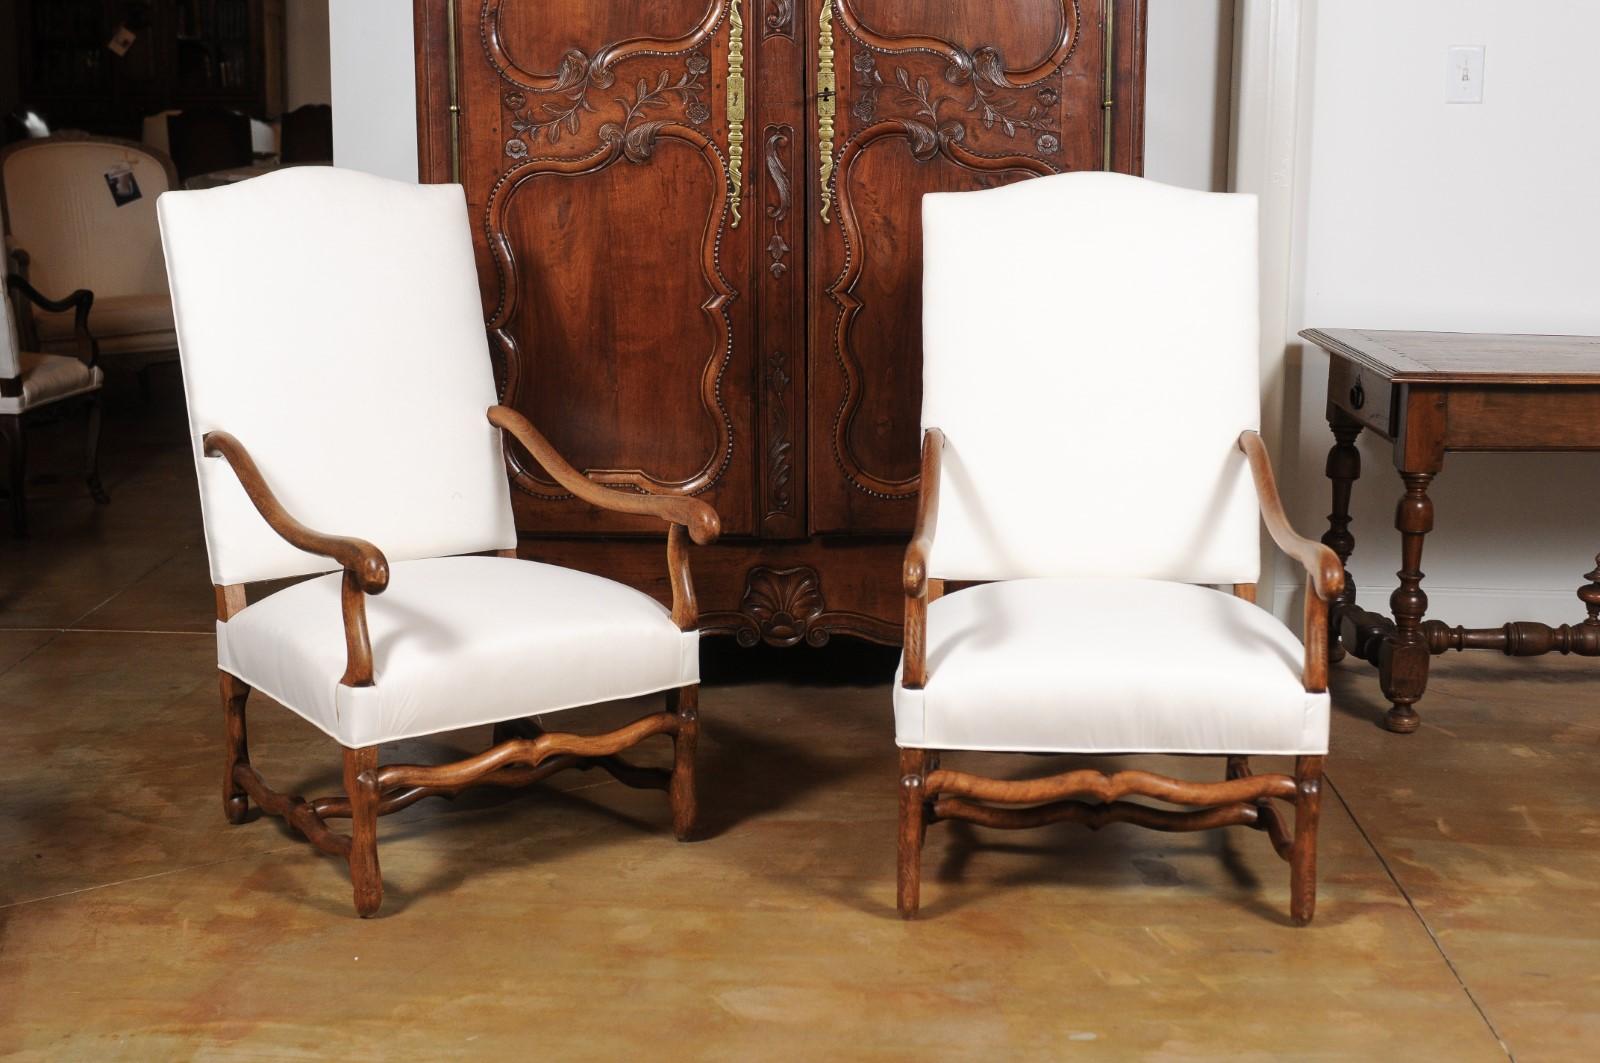 Large French Louis XIII style os de mouton armchairs from the late 19th century with new upholstery, three available priced individually. They are $2,950 each. Created in France during the last quarter of the 19th century, these wooden fauteuils